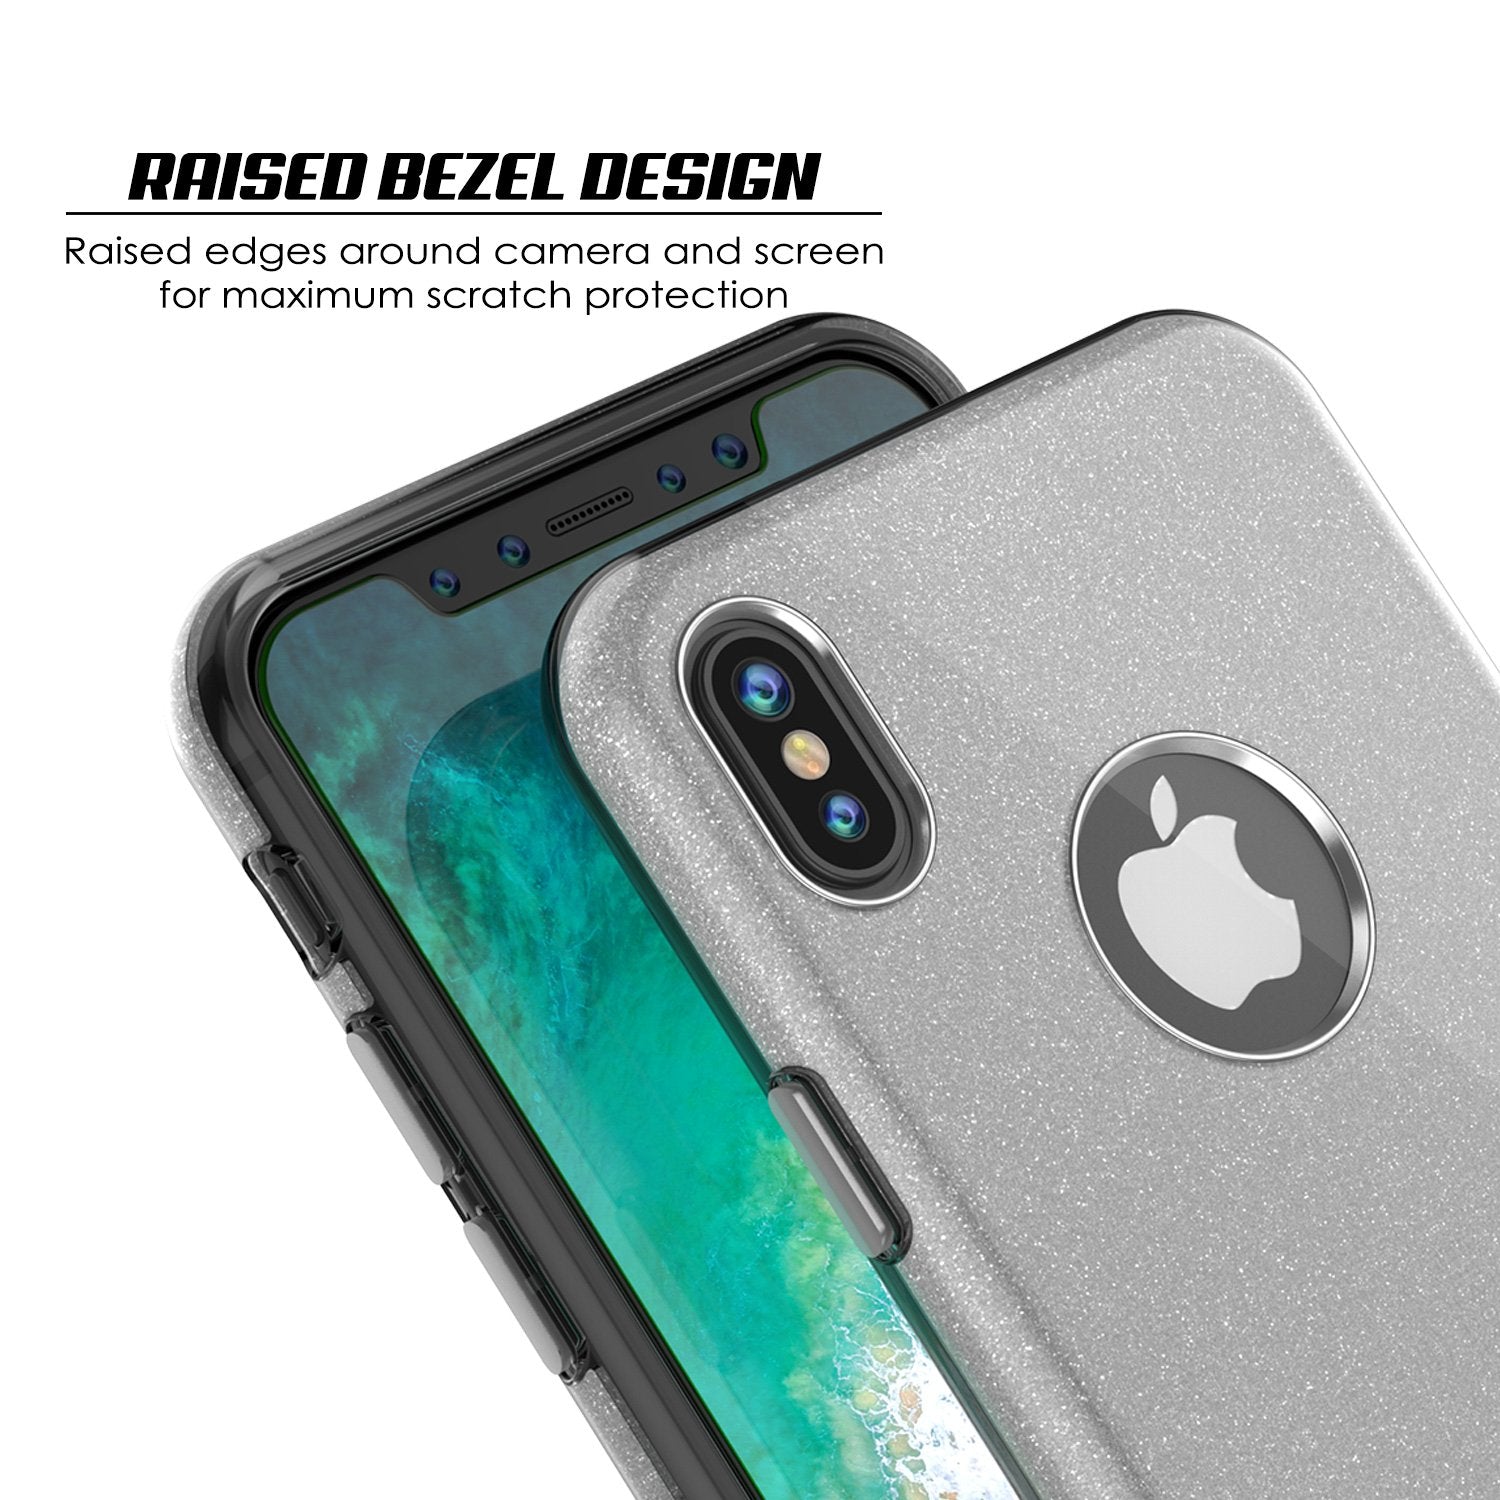 iPhone X Case, Punkcase Galactic 2.0 Series Ultra Slim w/ Tempered Glass Screen Protector | [Silver] - PunkCase NZ